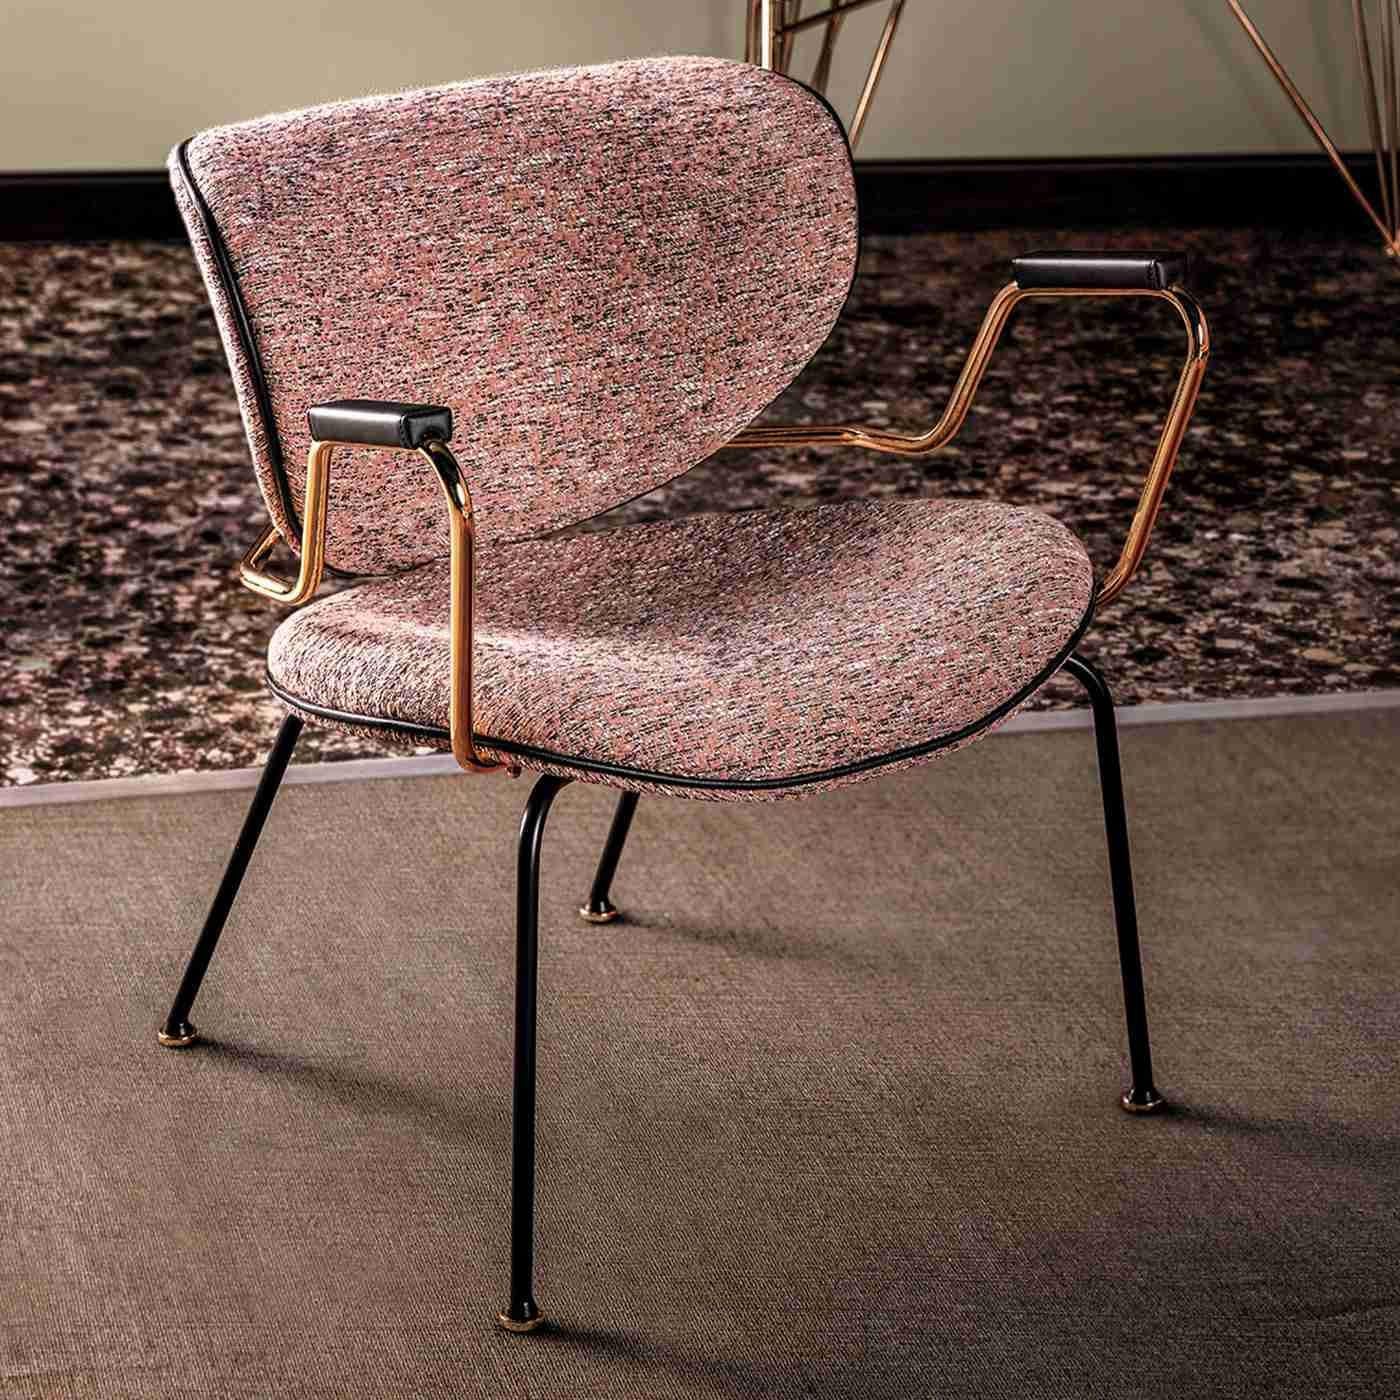 This chair features a stunning and clean design enriched with steel armrests with a polished gold finish. It comprises a metal frame with a matte black finish, and a curved seat and backrest made of beechwood and filled with high-resistance expanded